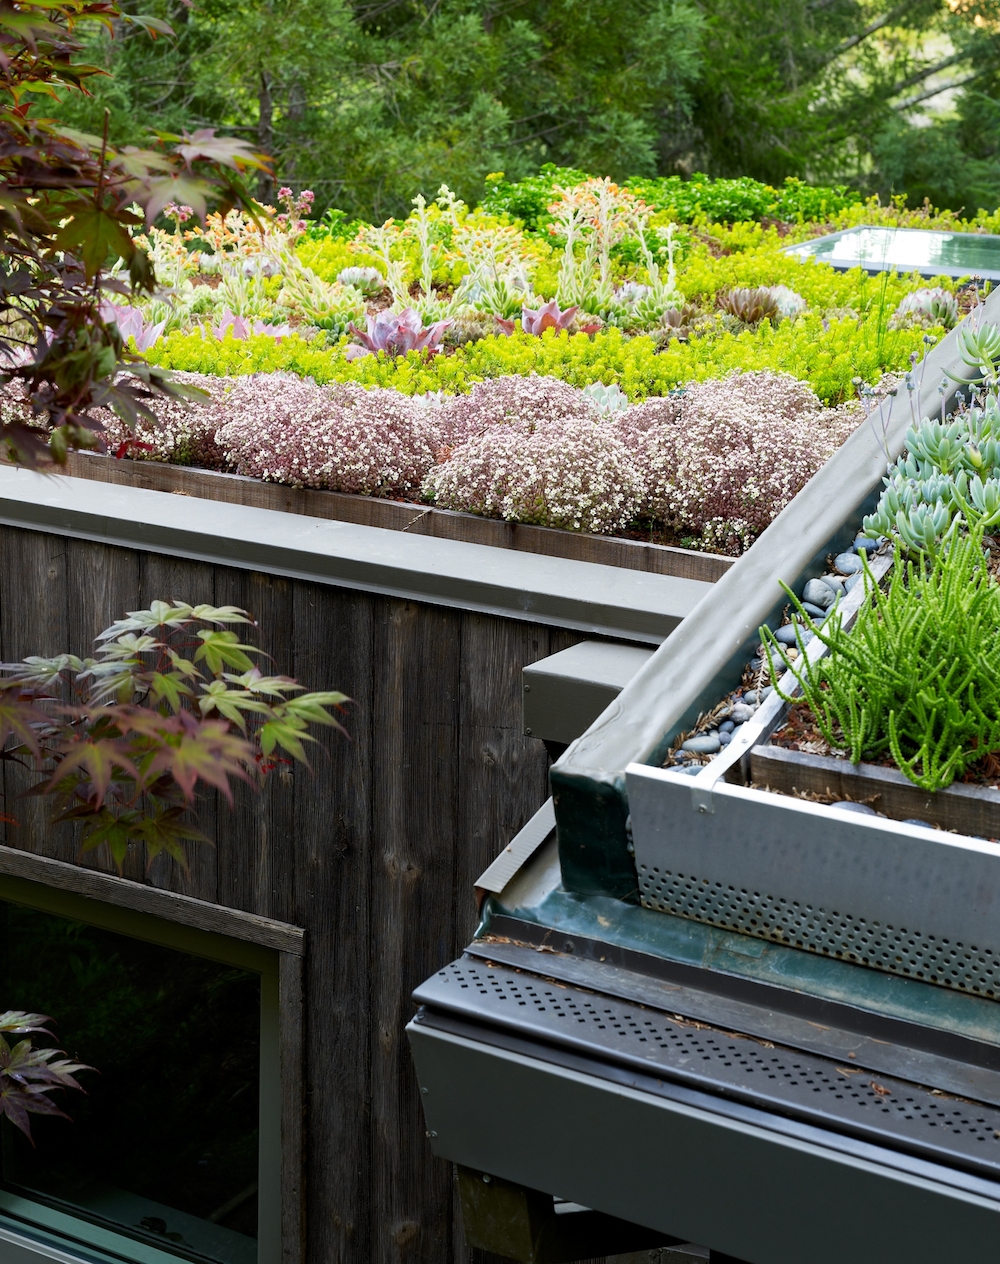 5 Examples of Living Green Roofs - Grass Turf and Succulent Sedums